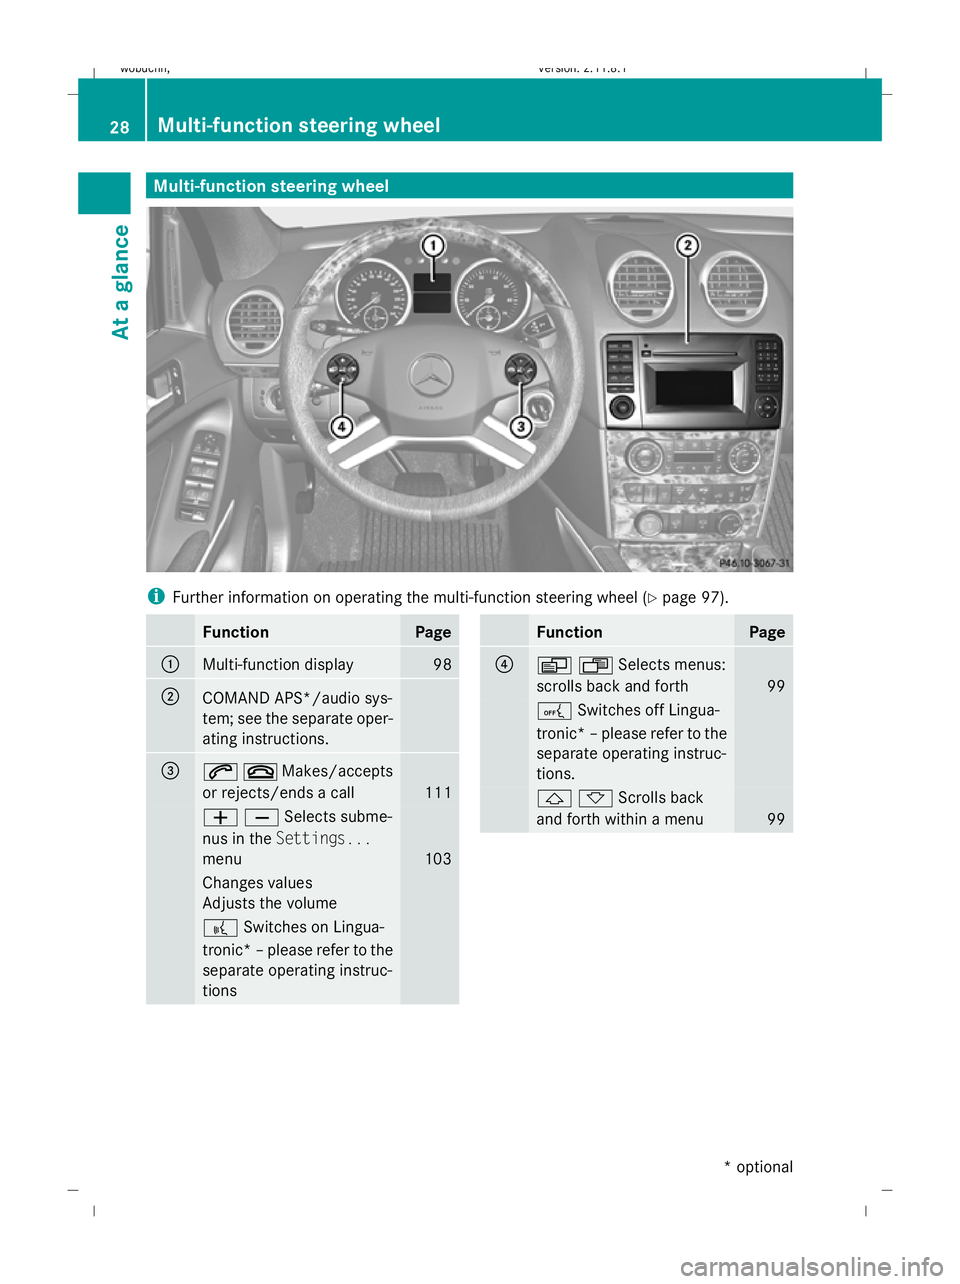 MERCEDES-BENZ GL SUV 2009  Owners Manual Multi-function steering wheel
i
Further information on operating the multi-function steering wheel (Y page 97).Function Page
:
Multi-function display 98
;
COMAND APS*/audio sys-
tem; see the separate 